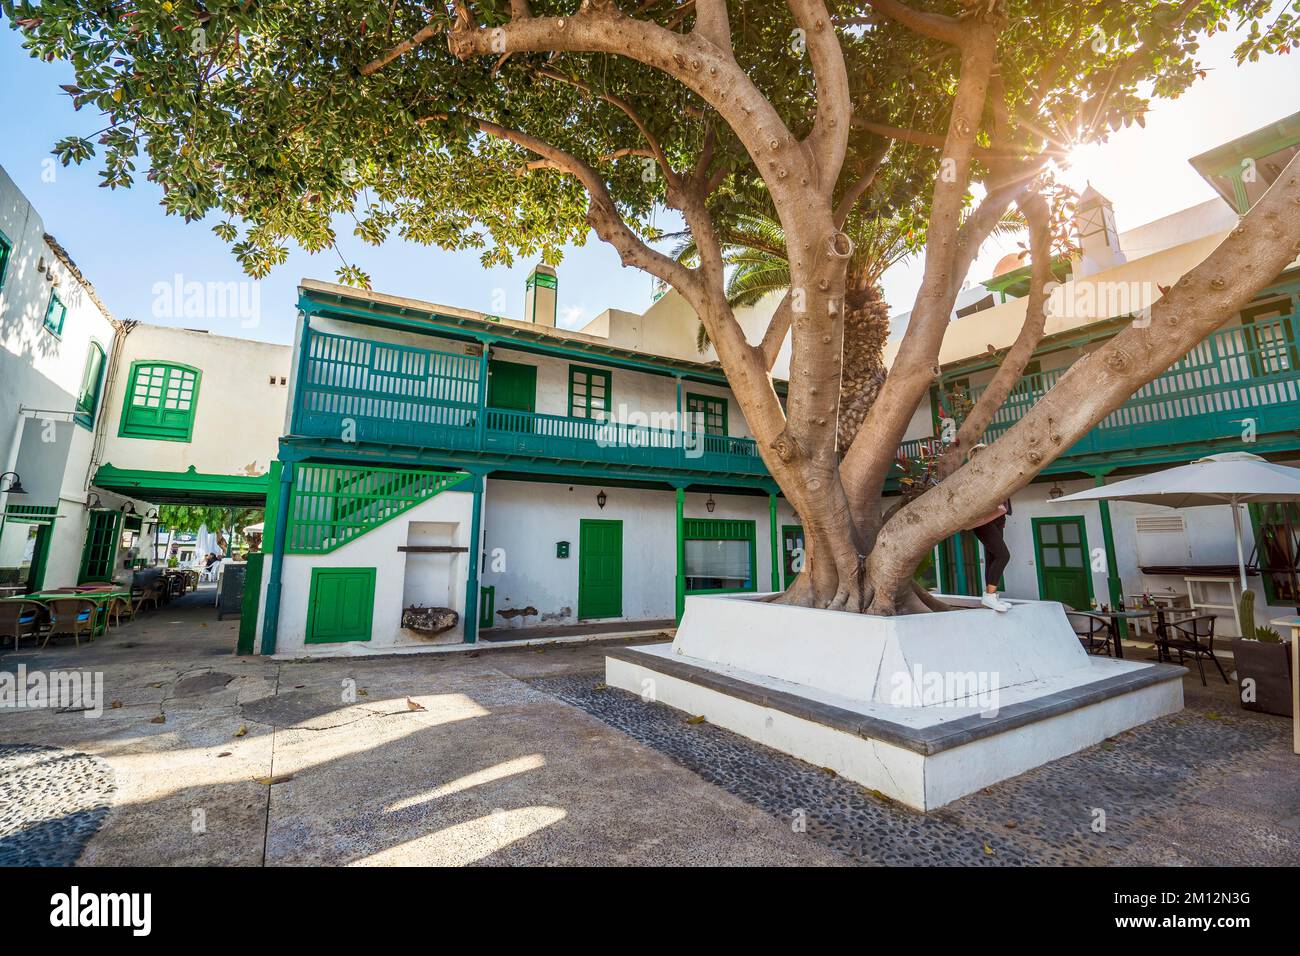 Picturesque white and green settlement called Pueblo Marinero designed by Cesar Manrique located in Costa Teguise, Lanzarote, Canary Island, Spain, Eu Stock Photo